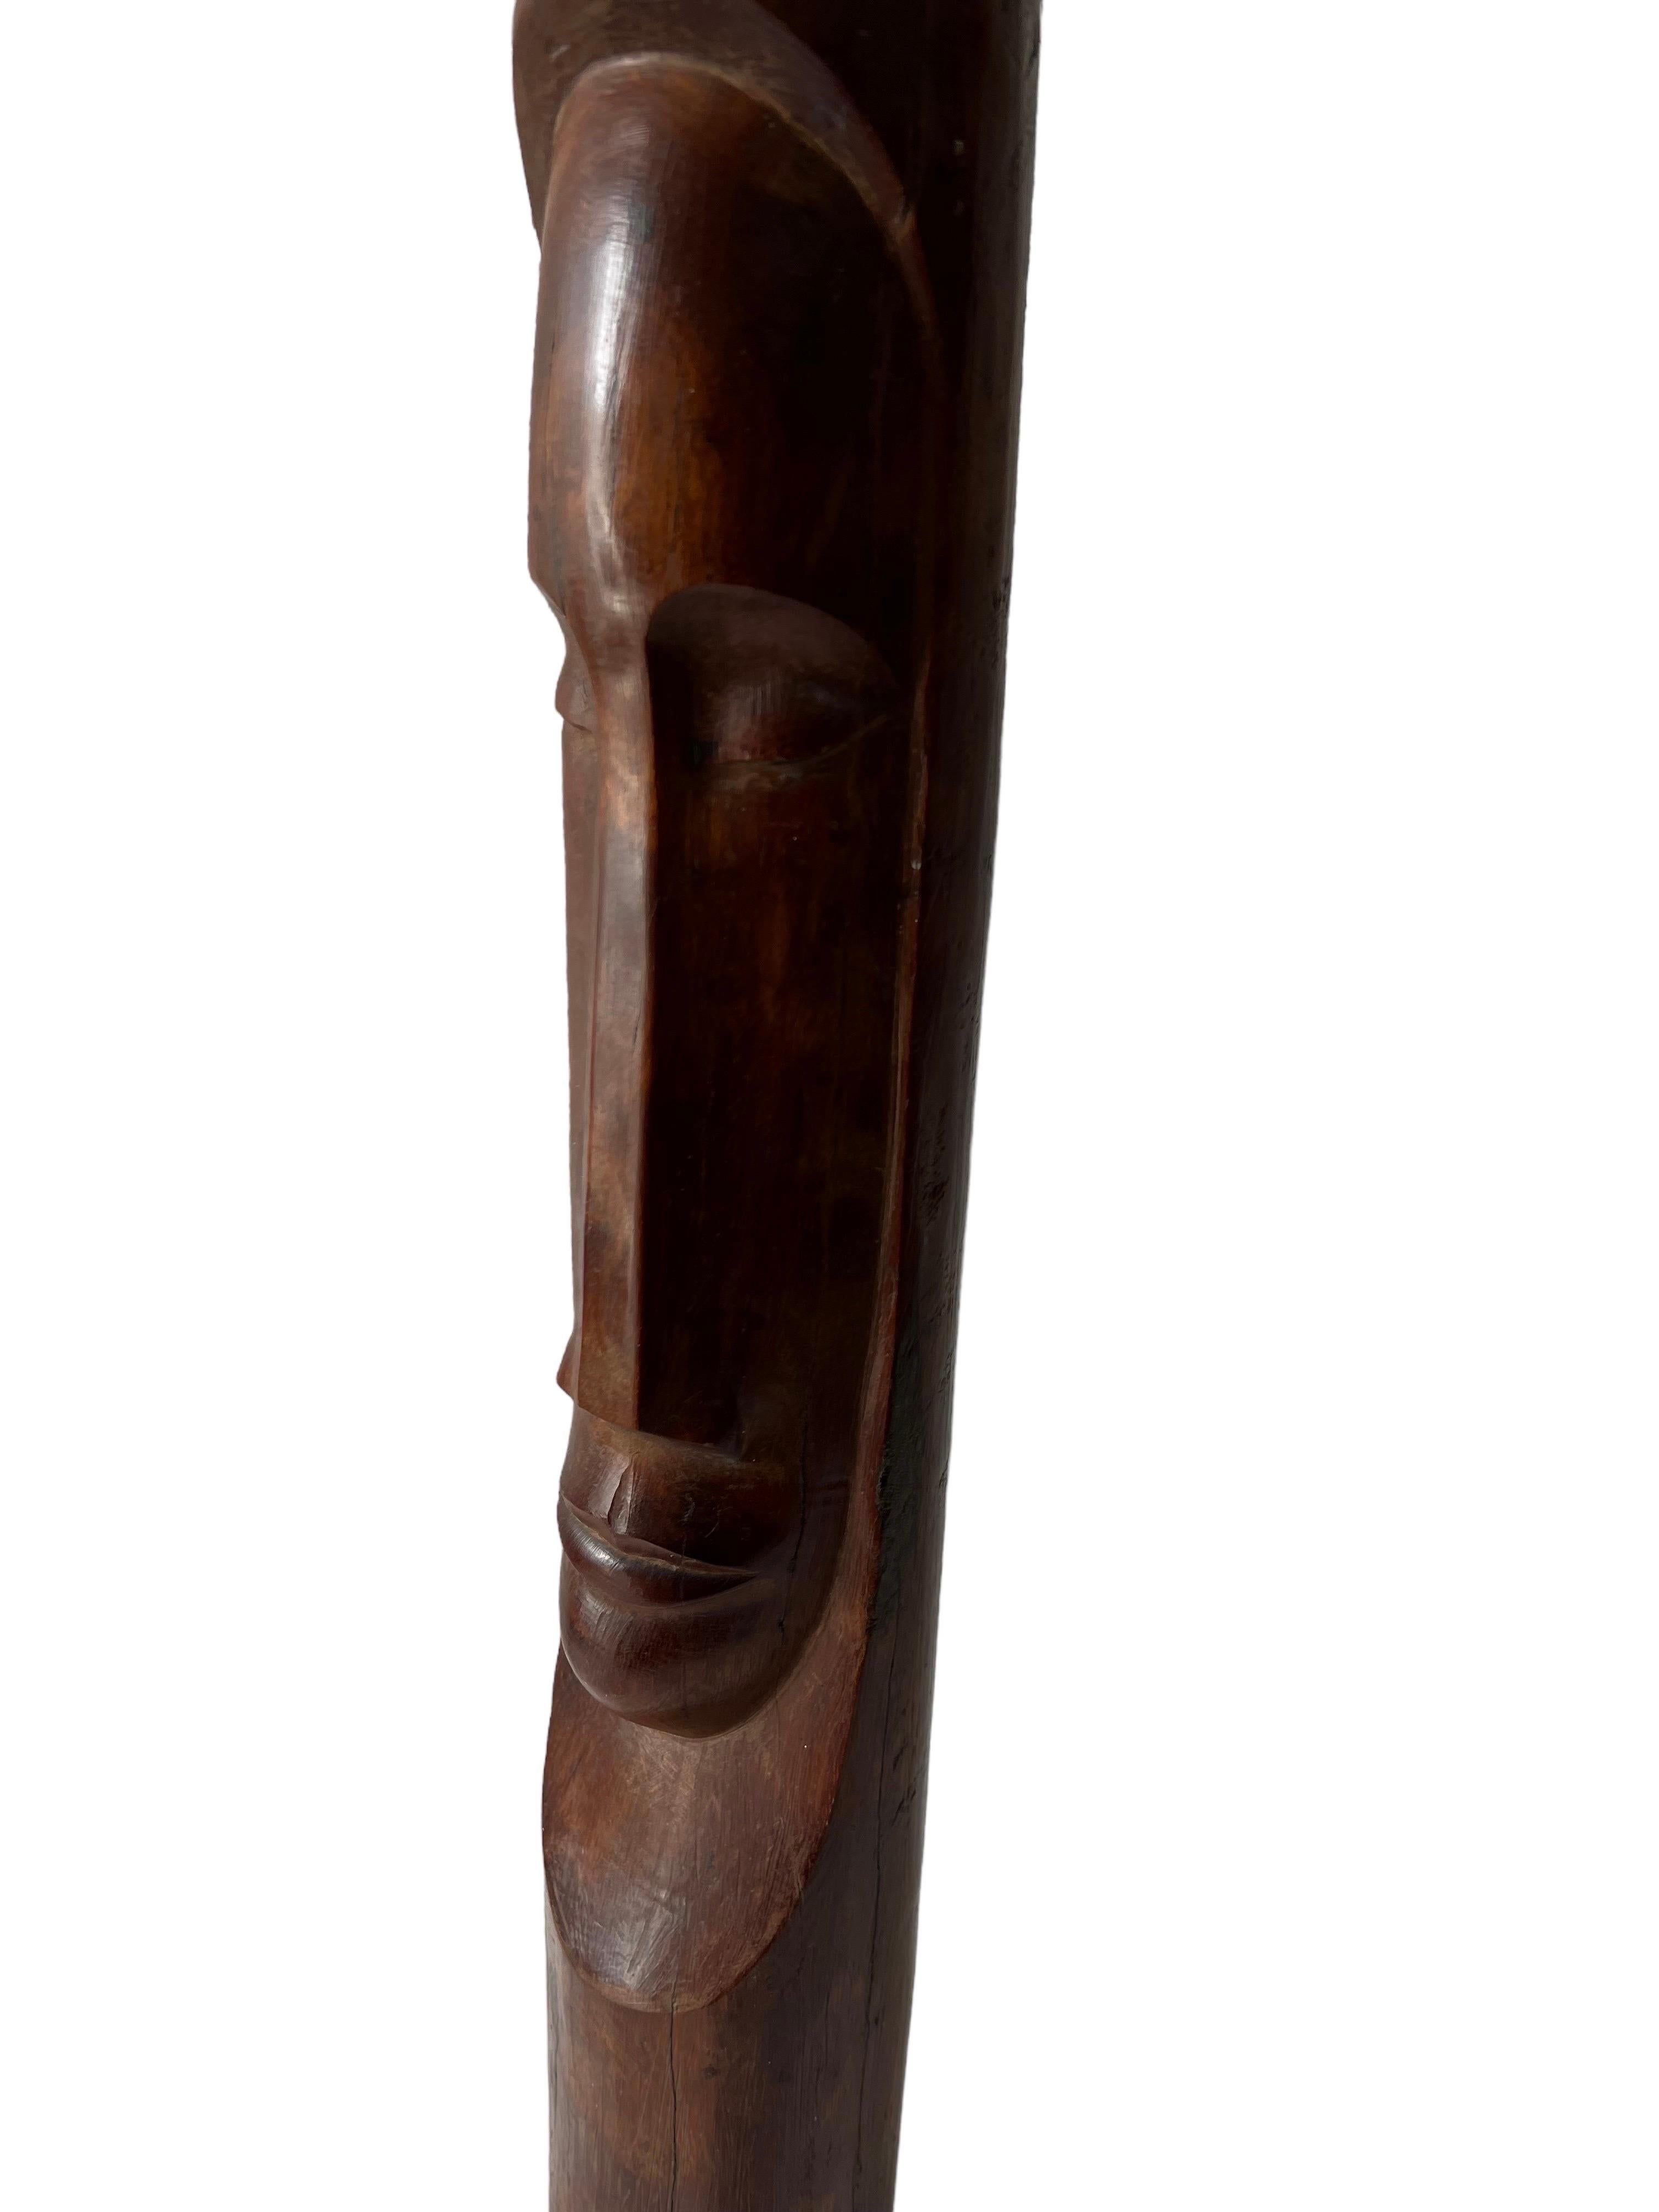 Florencio Gelabert Y Perez (Cuban, 1904-1995)
Hand carved, signed; 1979
Materials: Cuban wood (mahogany?)
Dimensions 23 X 4 X 4 inches
Label affixed to underside: National Registry of Cultural Assets of the Republic of Cuba Ministry of